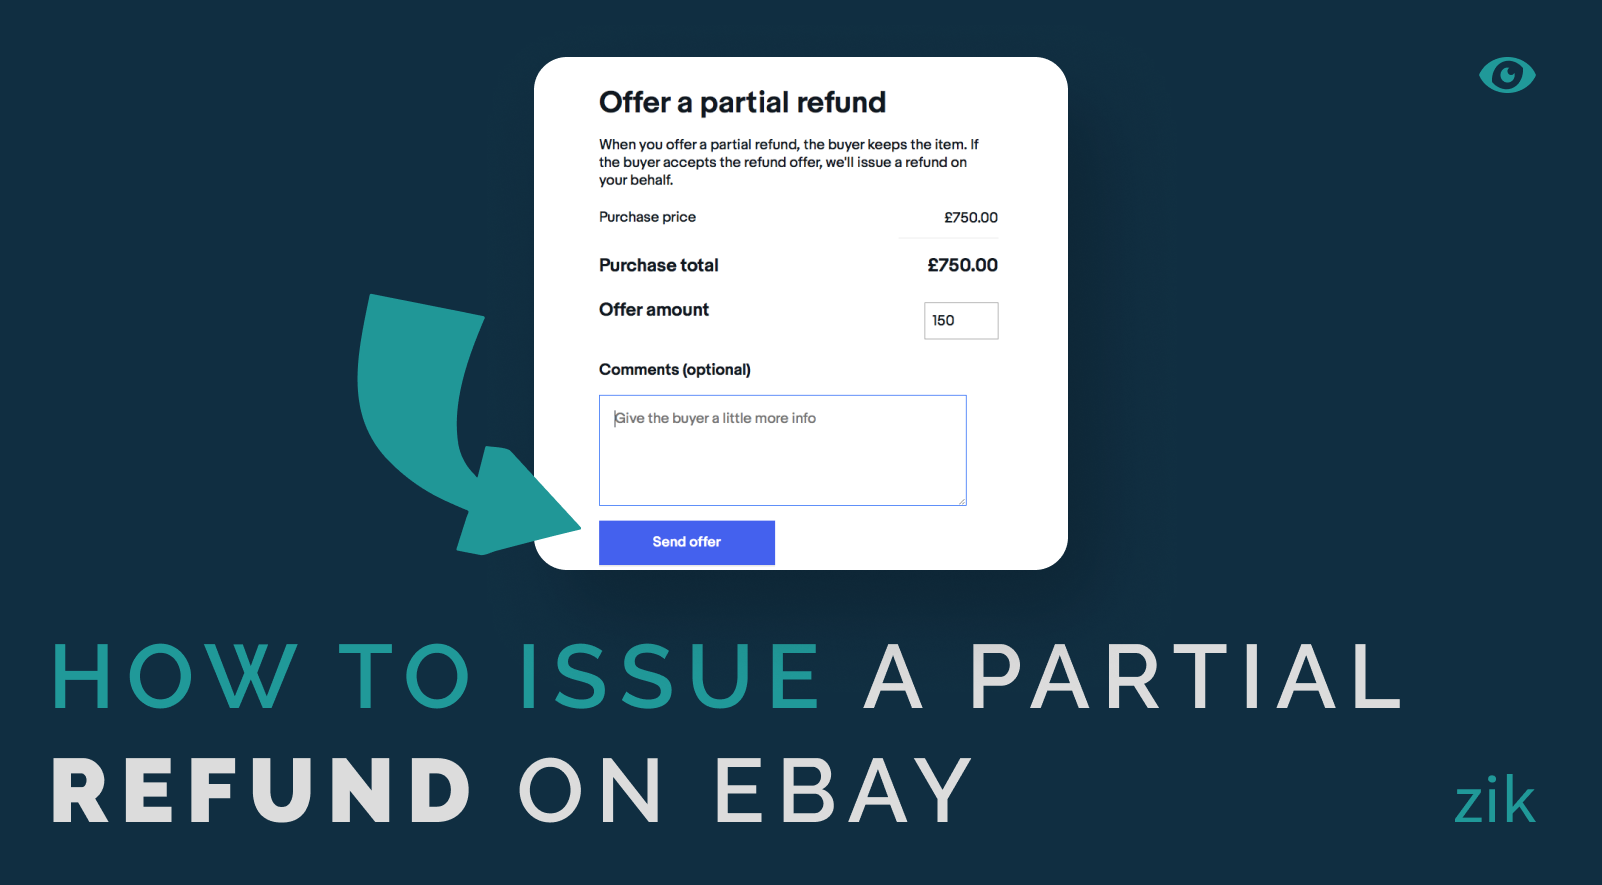 How to issue a partial refund on eBay